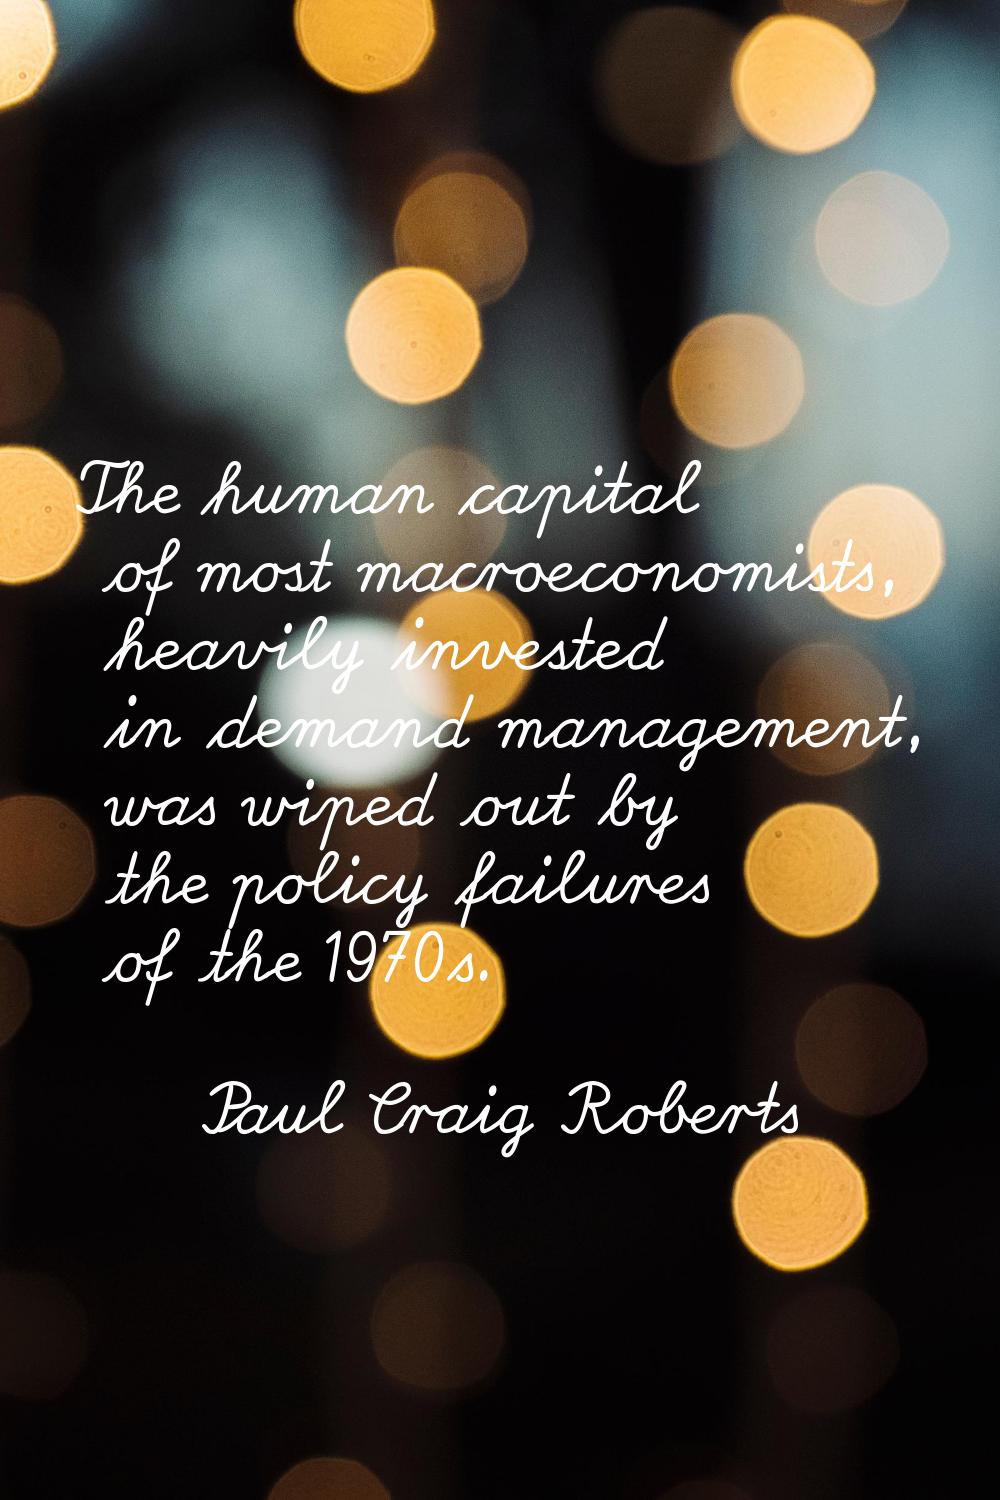 The human capital of most macroeconomists, heavily invested in demand management, was wiped out by 